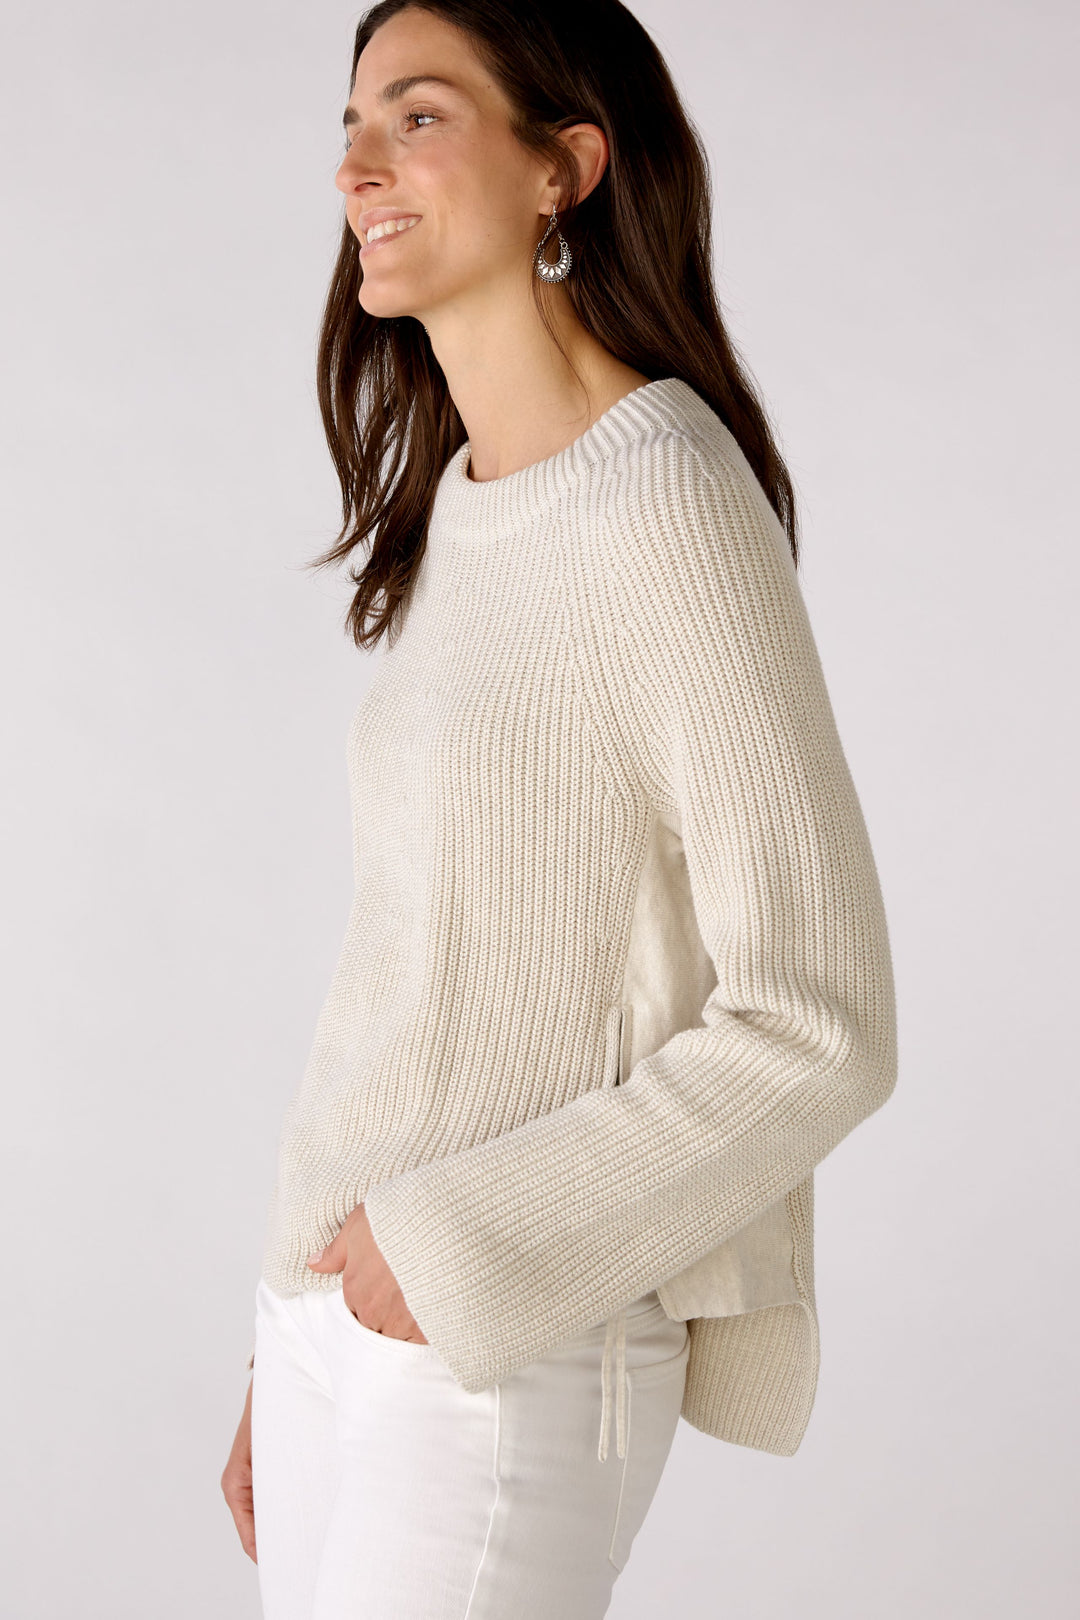 Oui 77657 Stone Pullover Dotique side